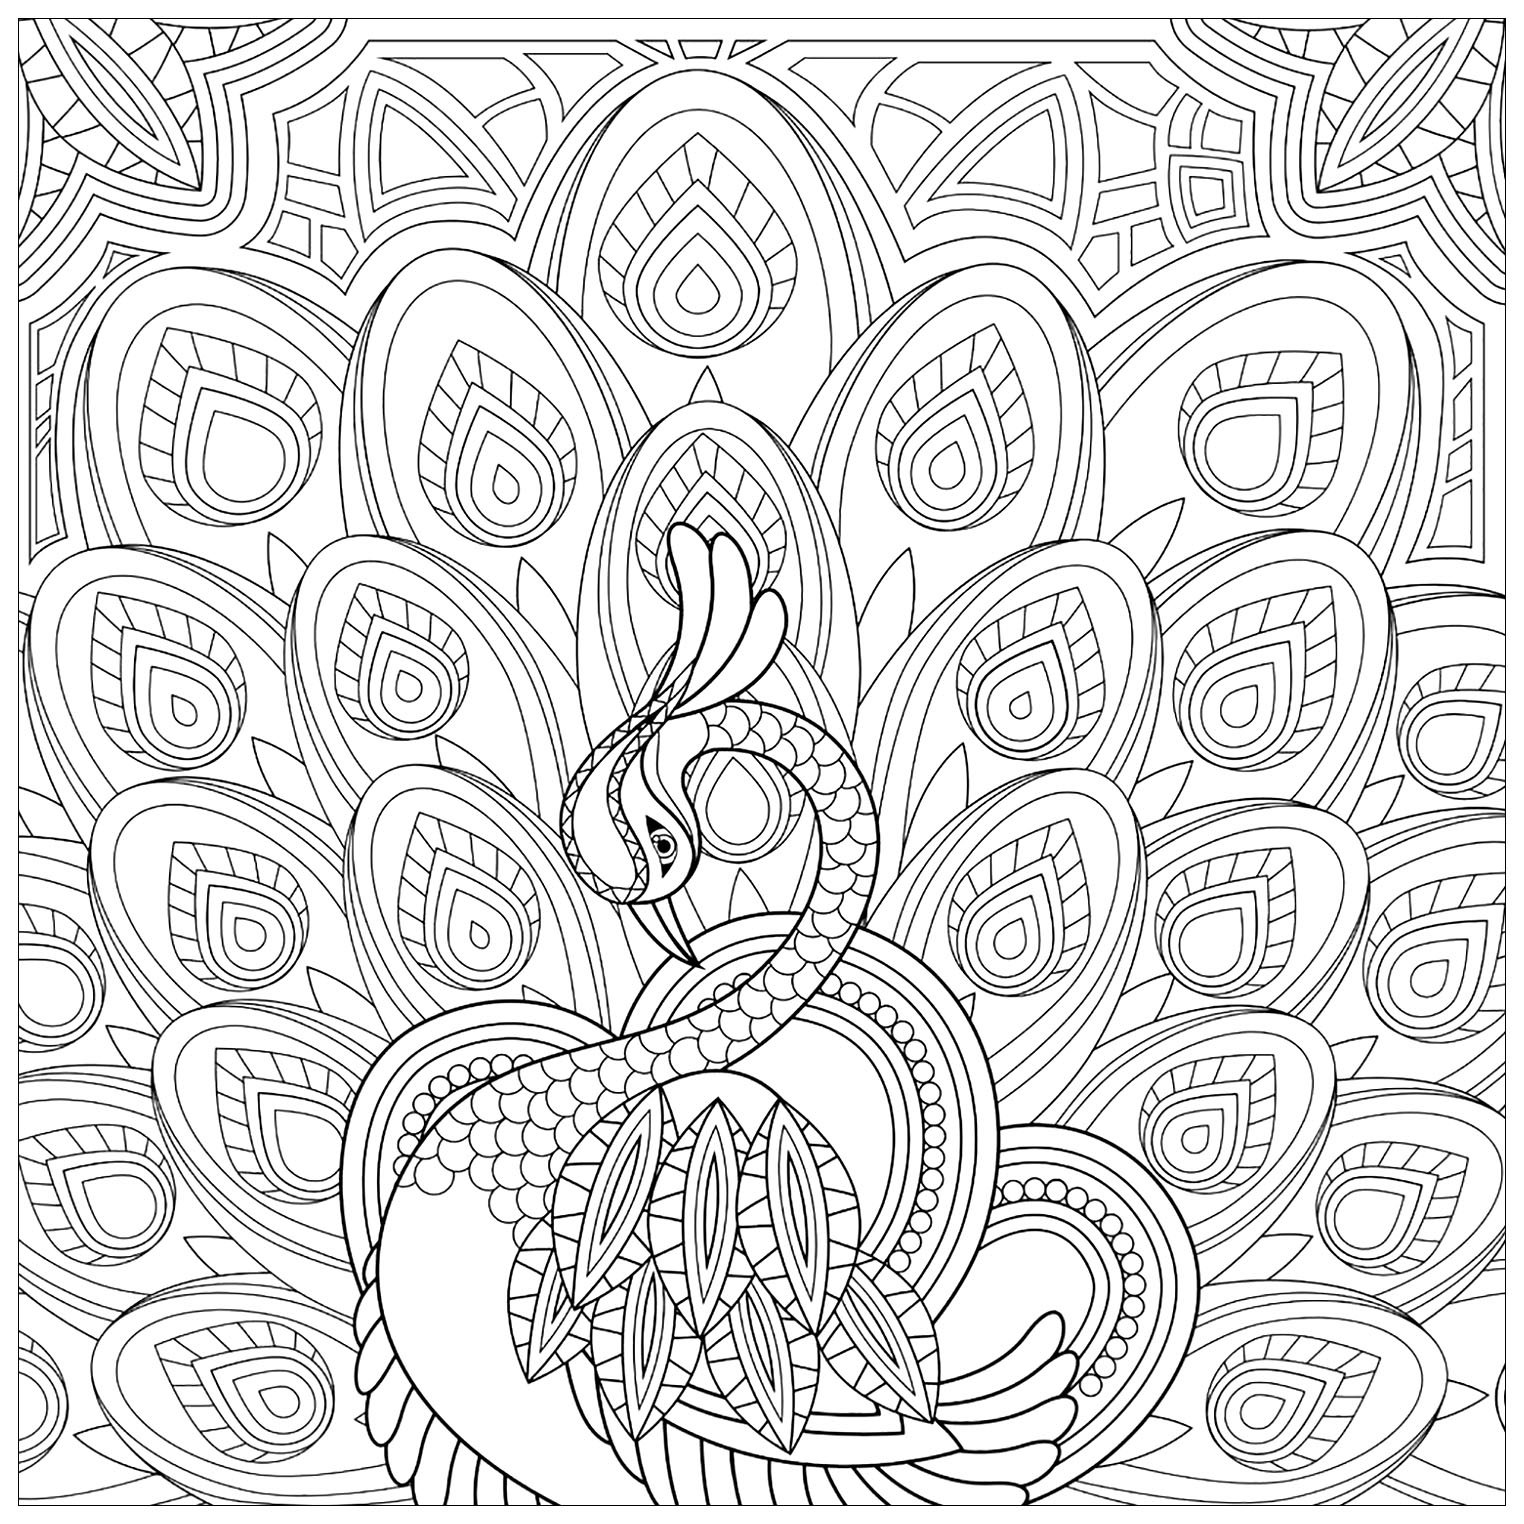 Coloring Pages : Peacocks Free To Color For Children Kids Coloring  Printable Zodiac Signs Lines And Angles